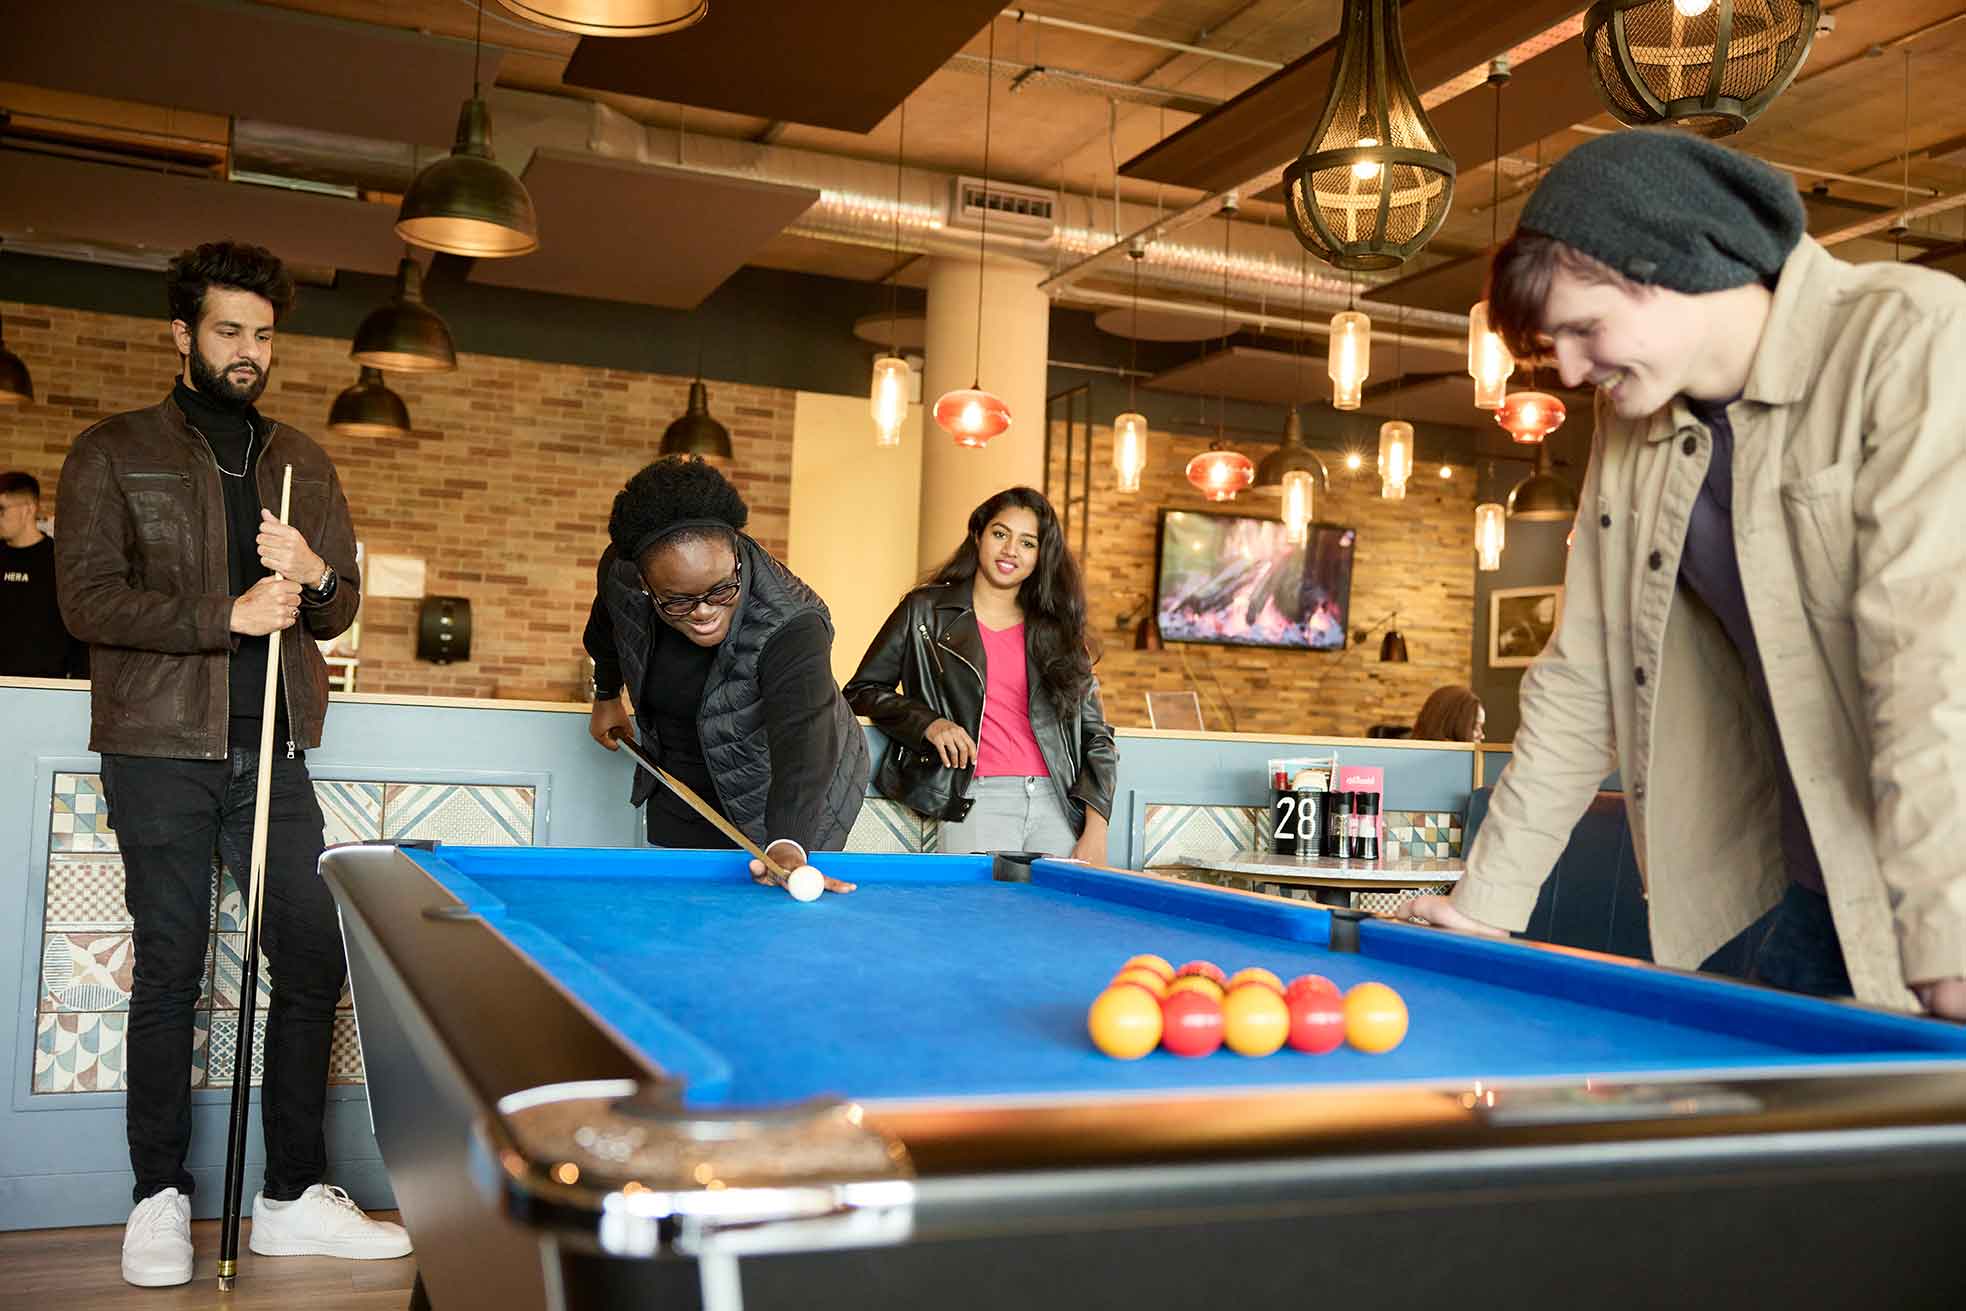 Four students play a game of pool together in the Waterside Bar and Restaurant on campus at the University of Northampton. One student holding a cue takes a shot at the white cue ball while the other three watch